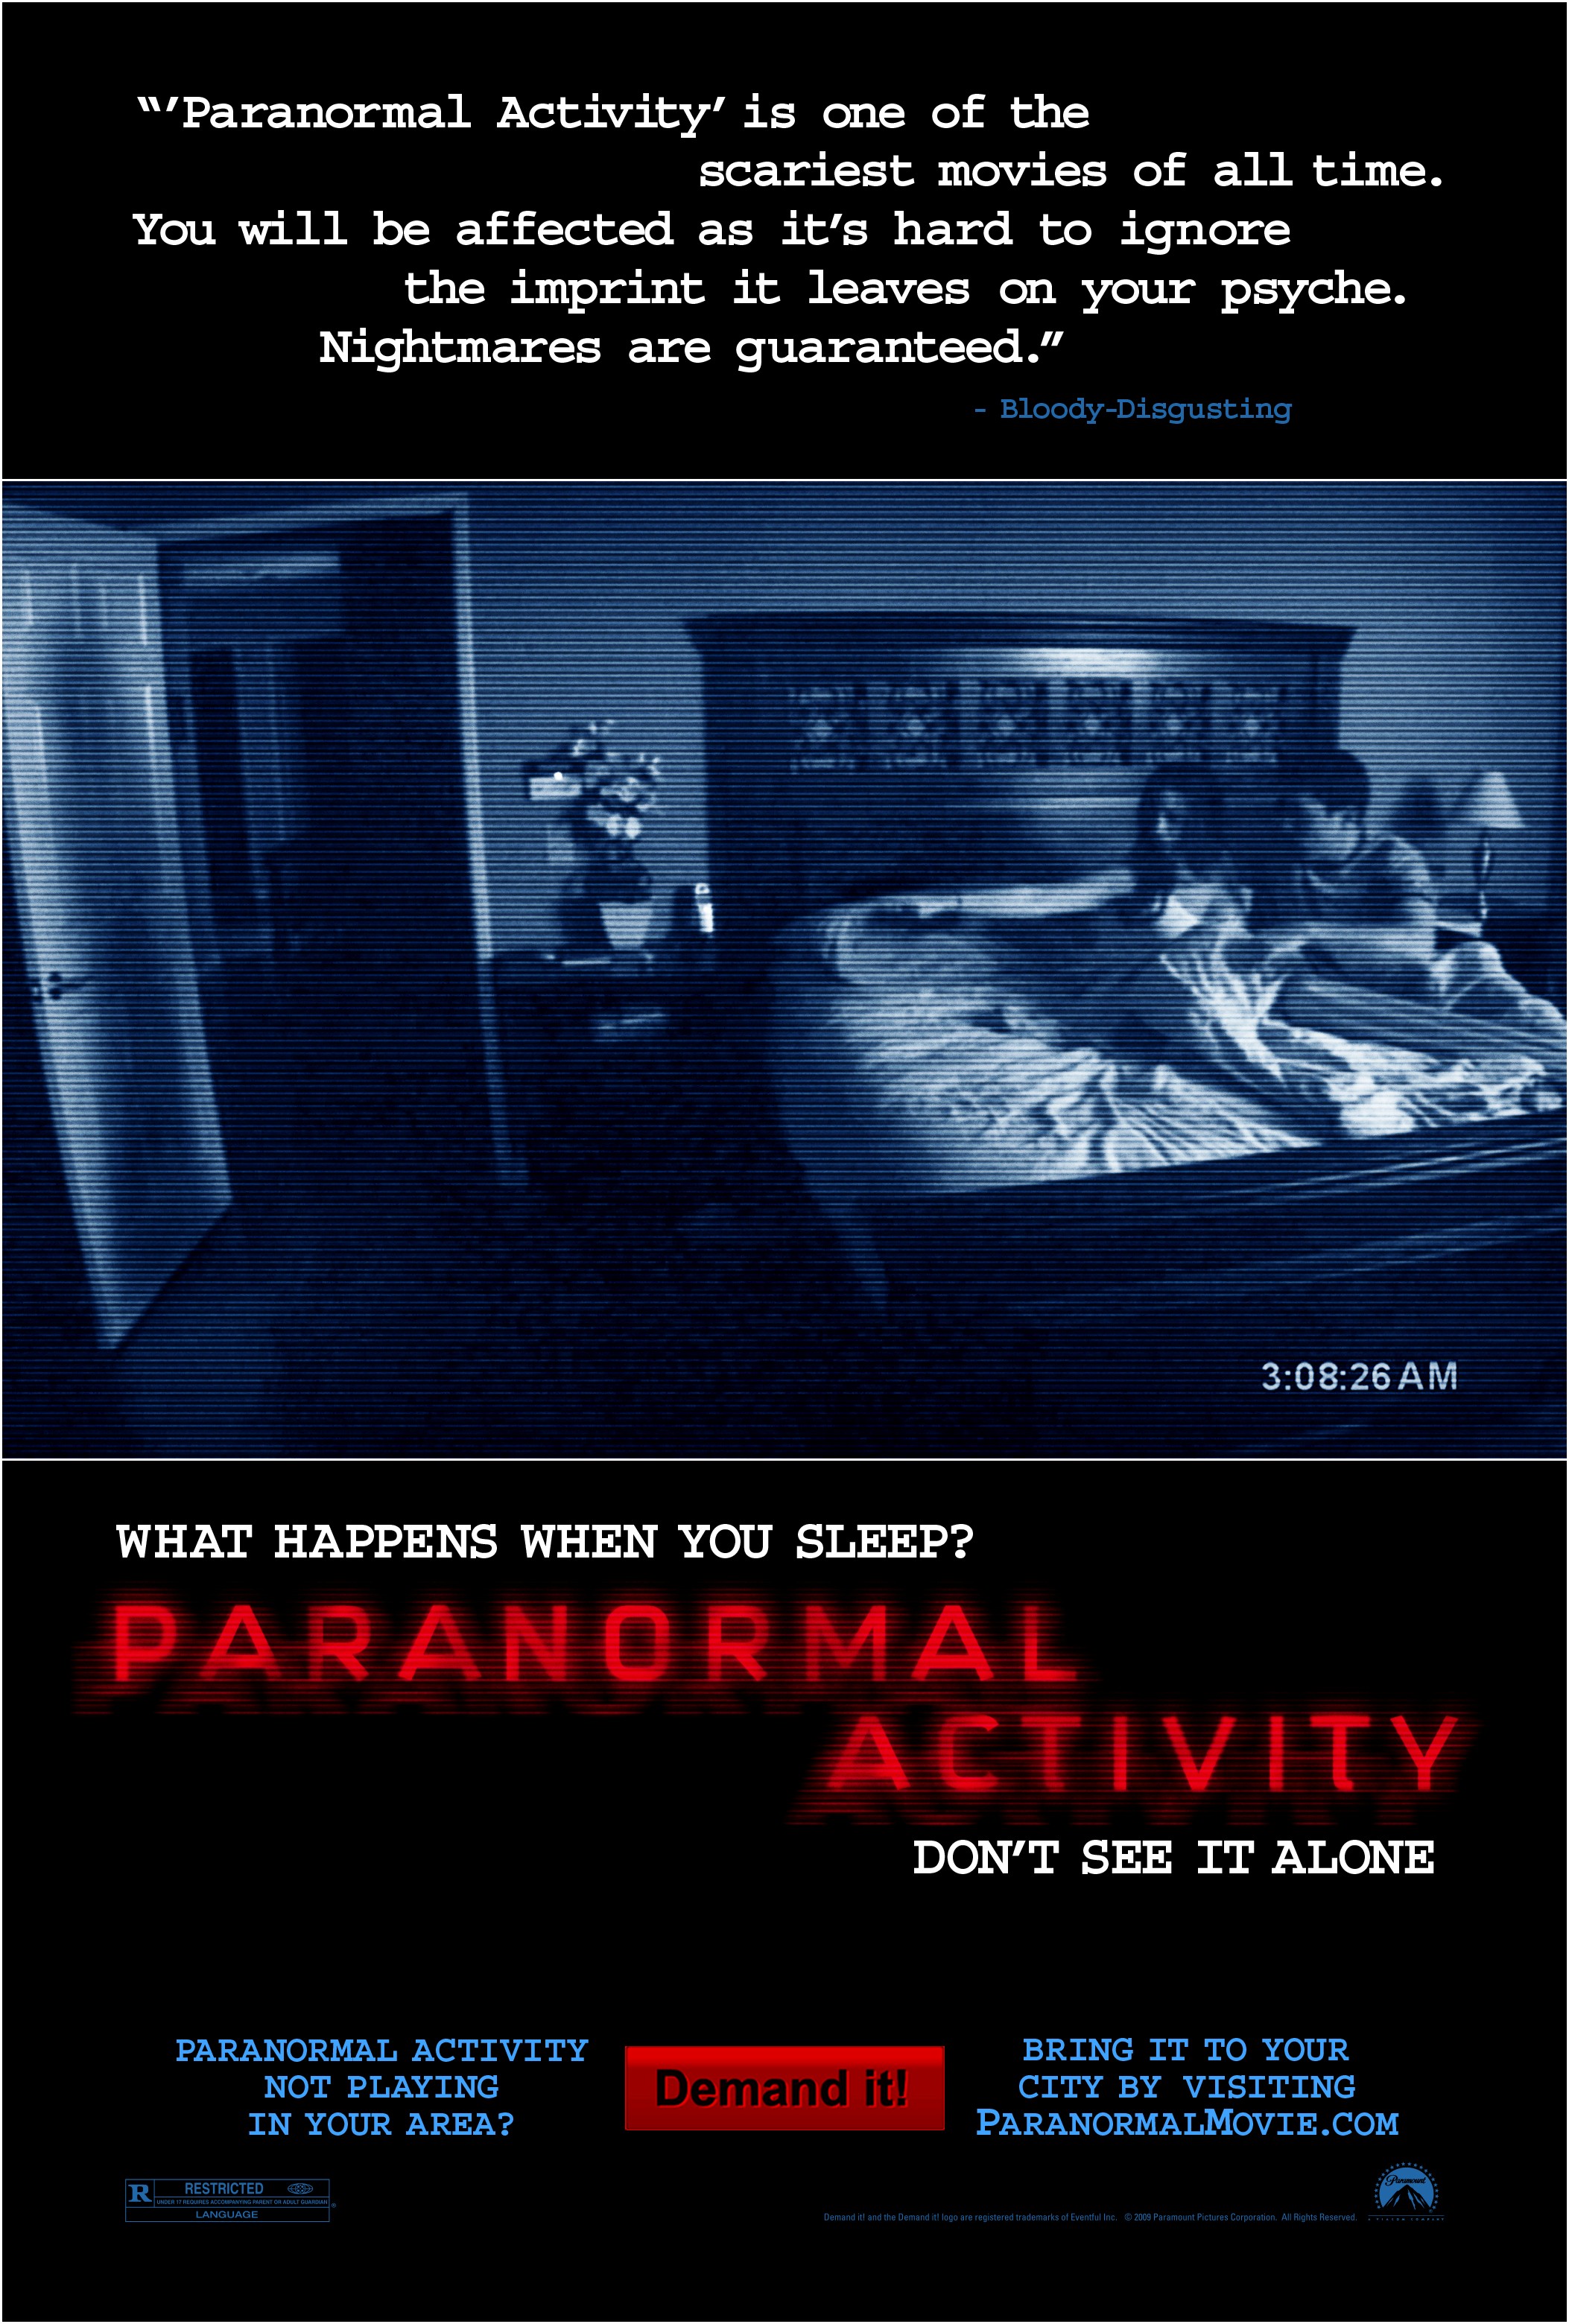 0780 - Paranormal Activity